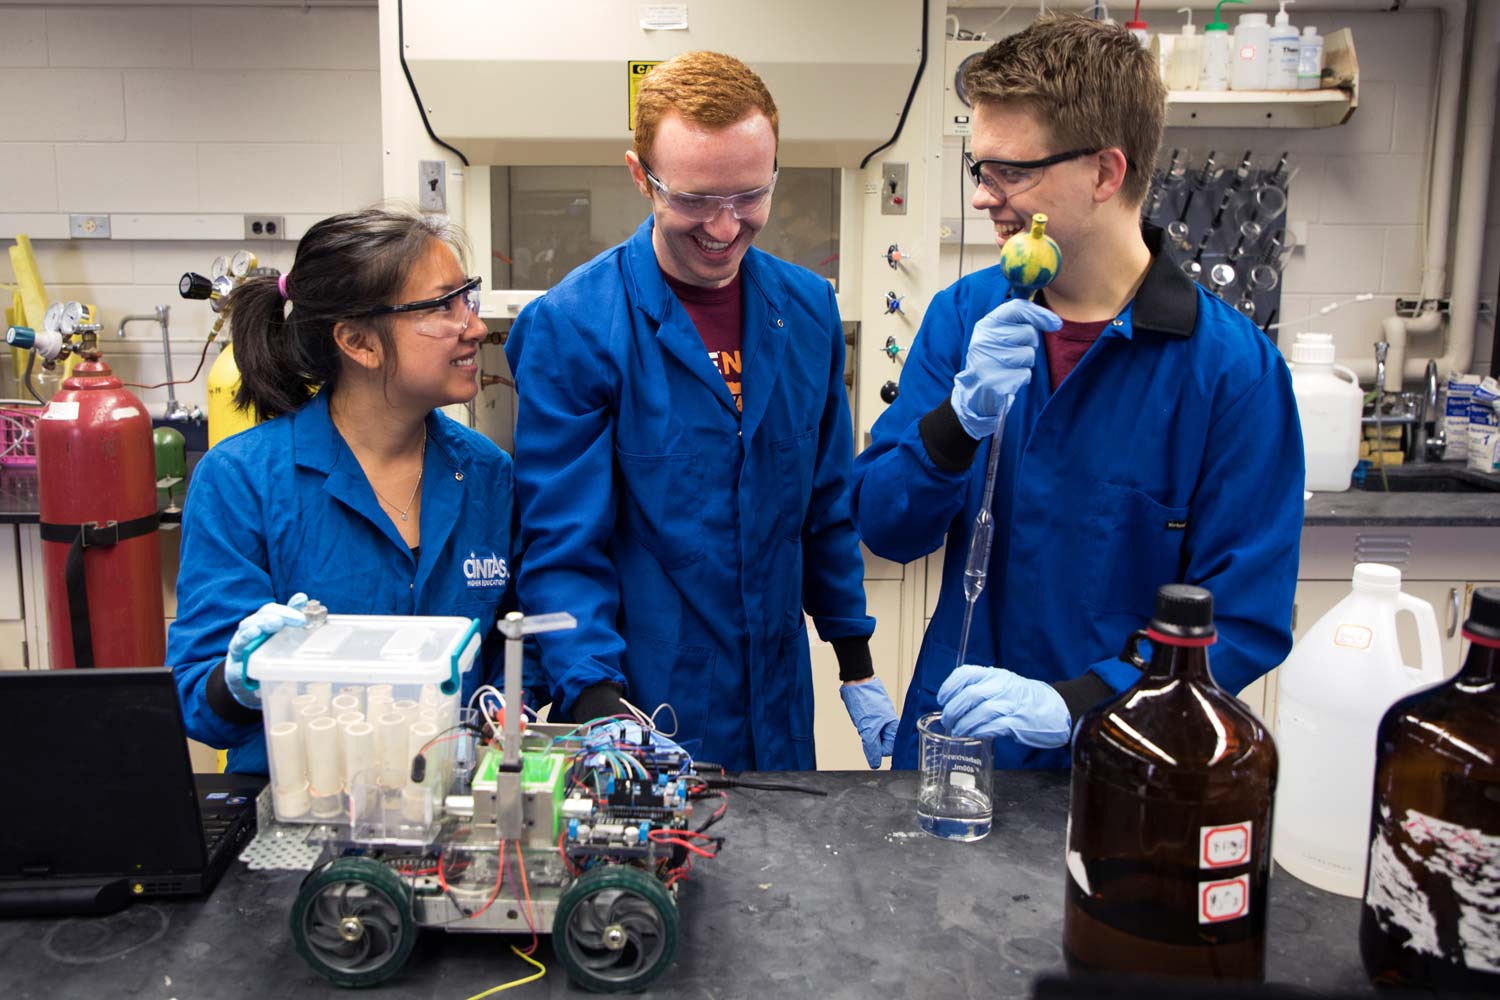 Chemical Engineering students works on a project in a lab.